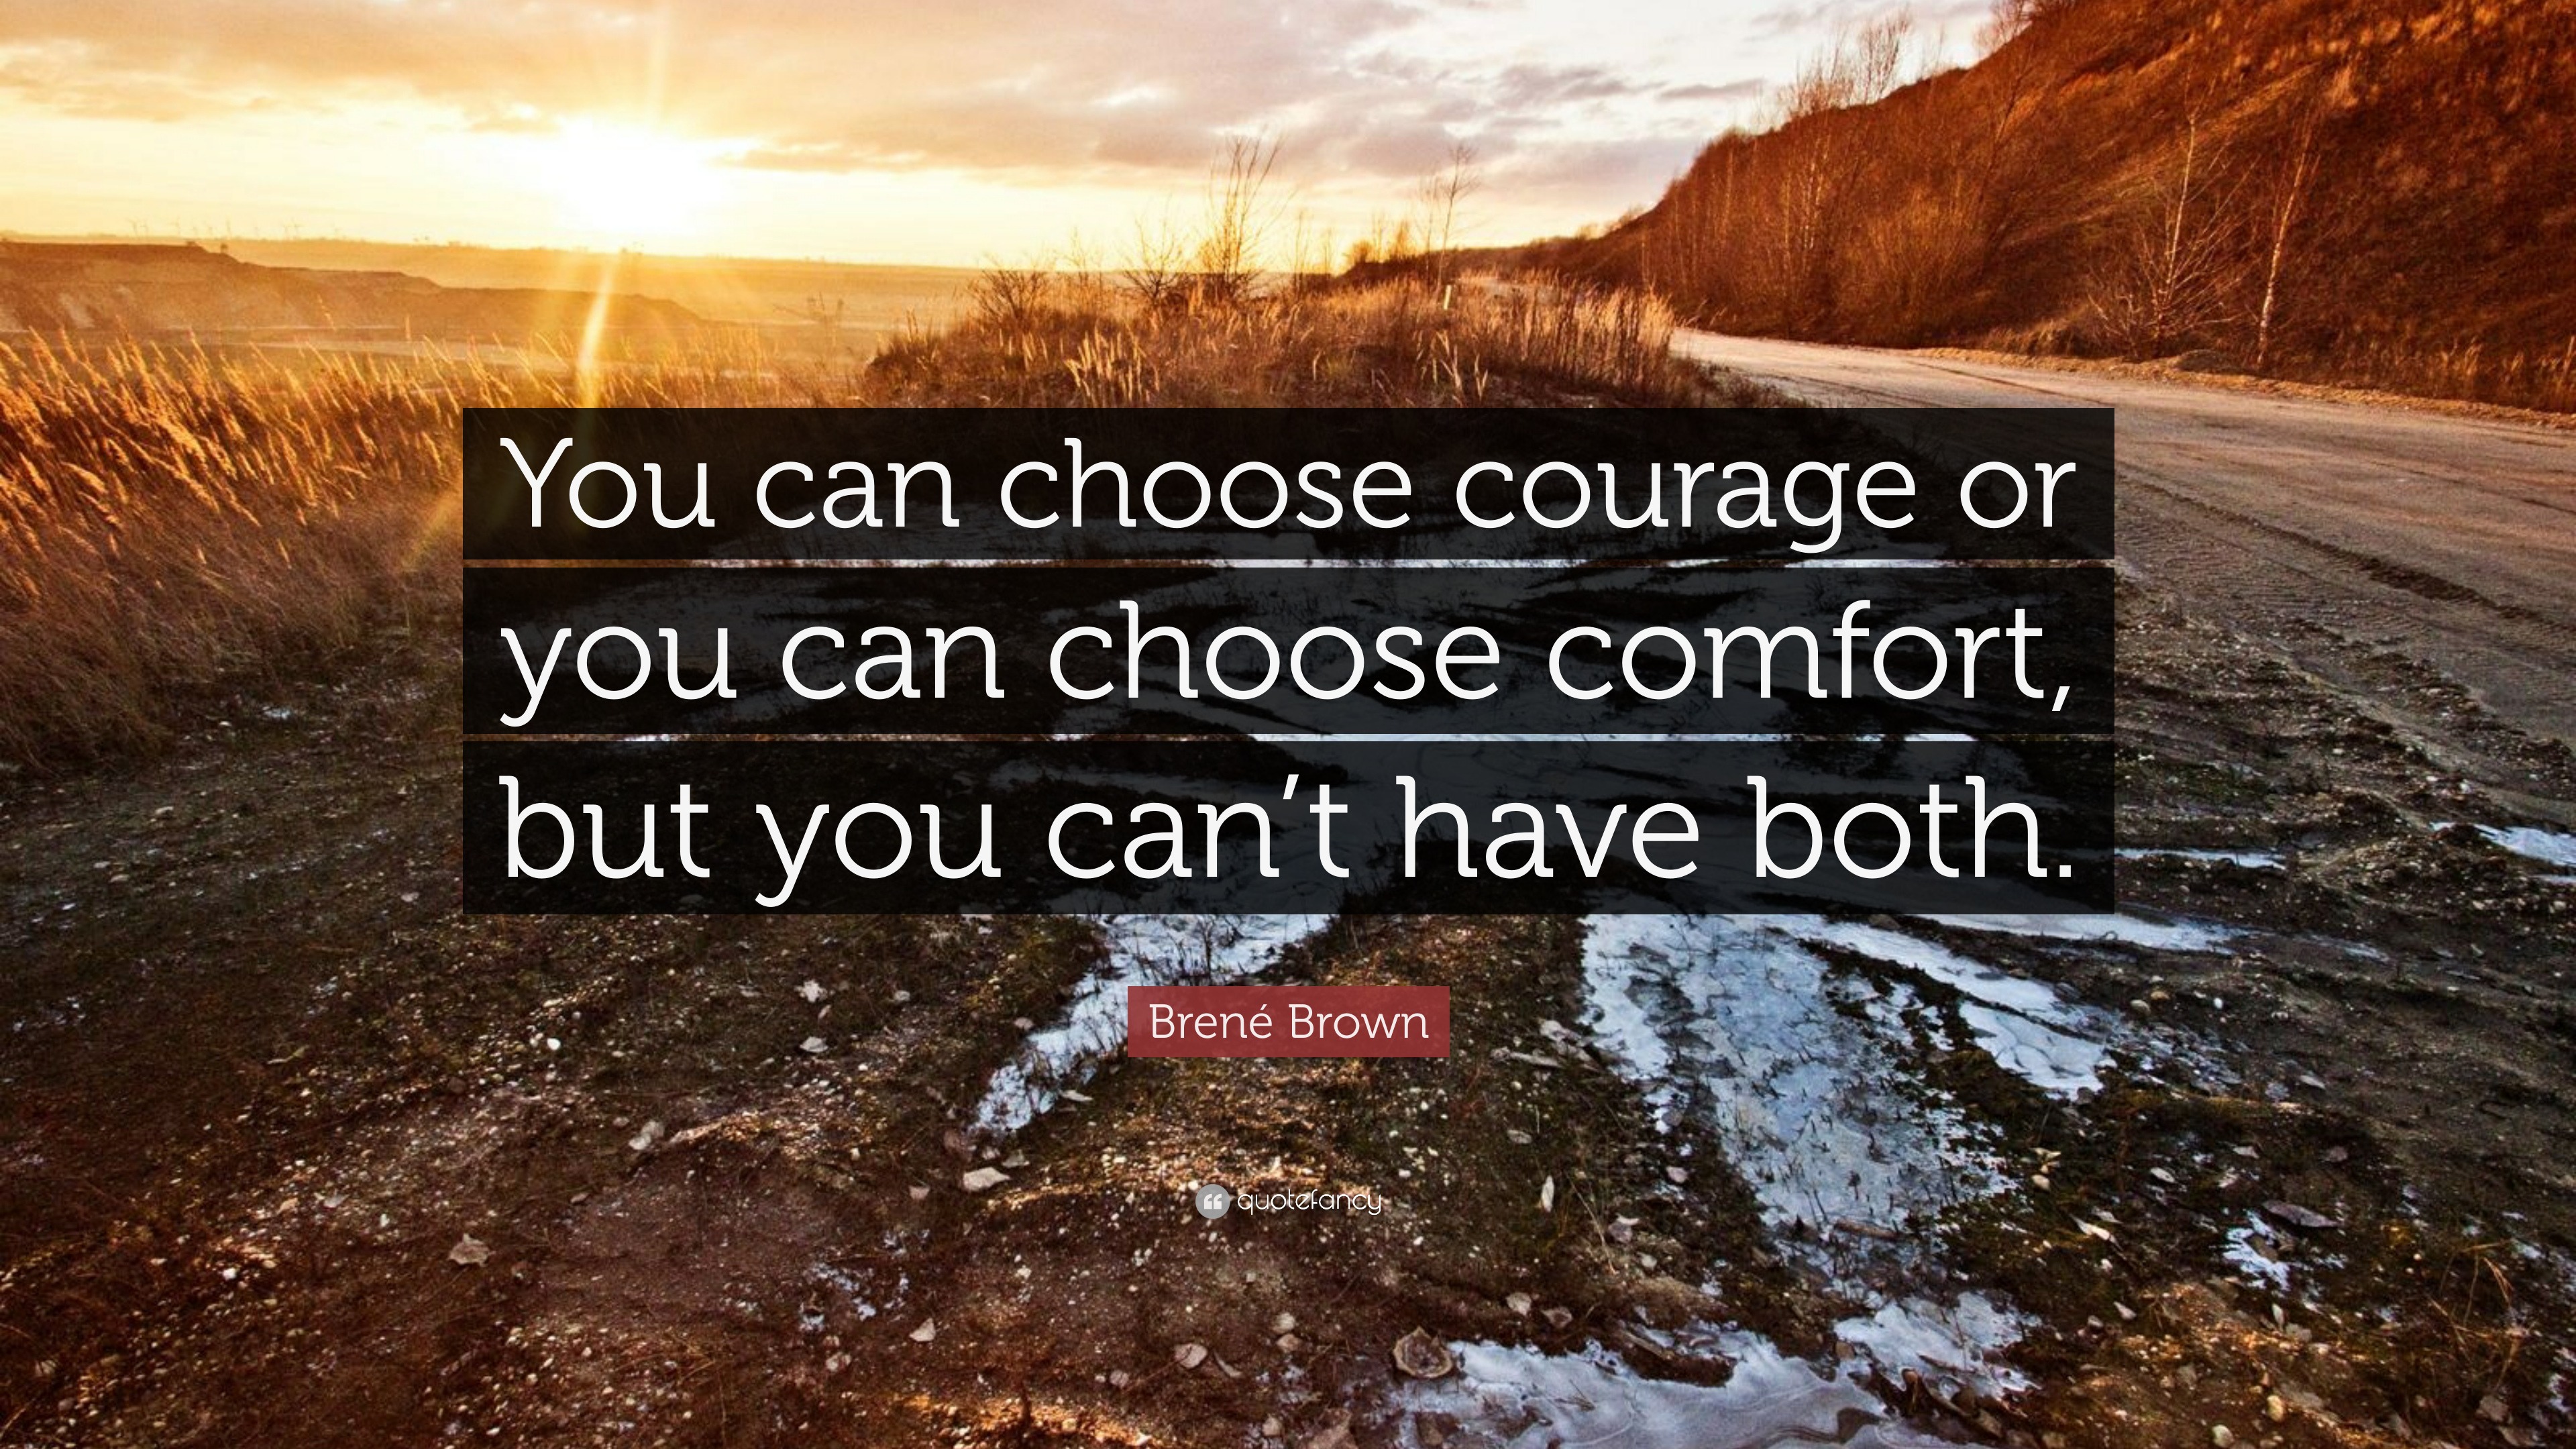 brene brown have the courage to stand alone